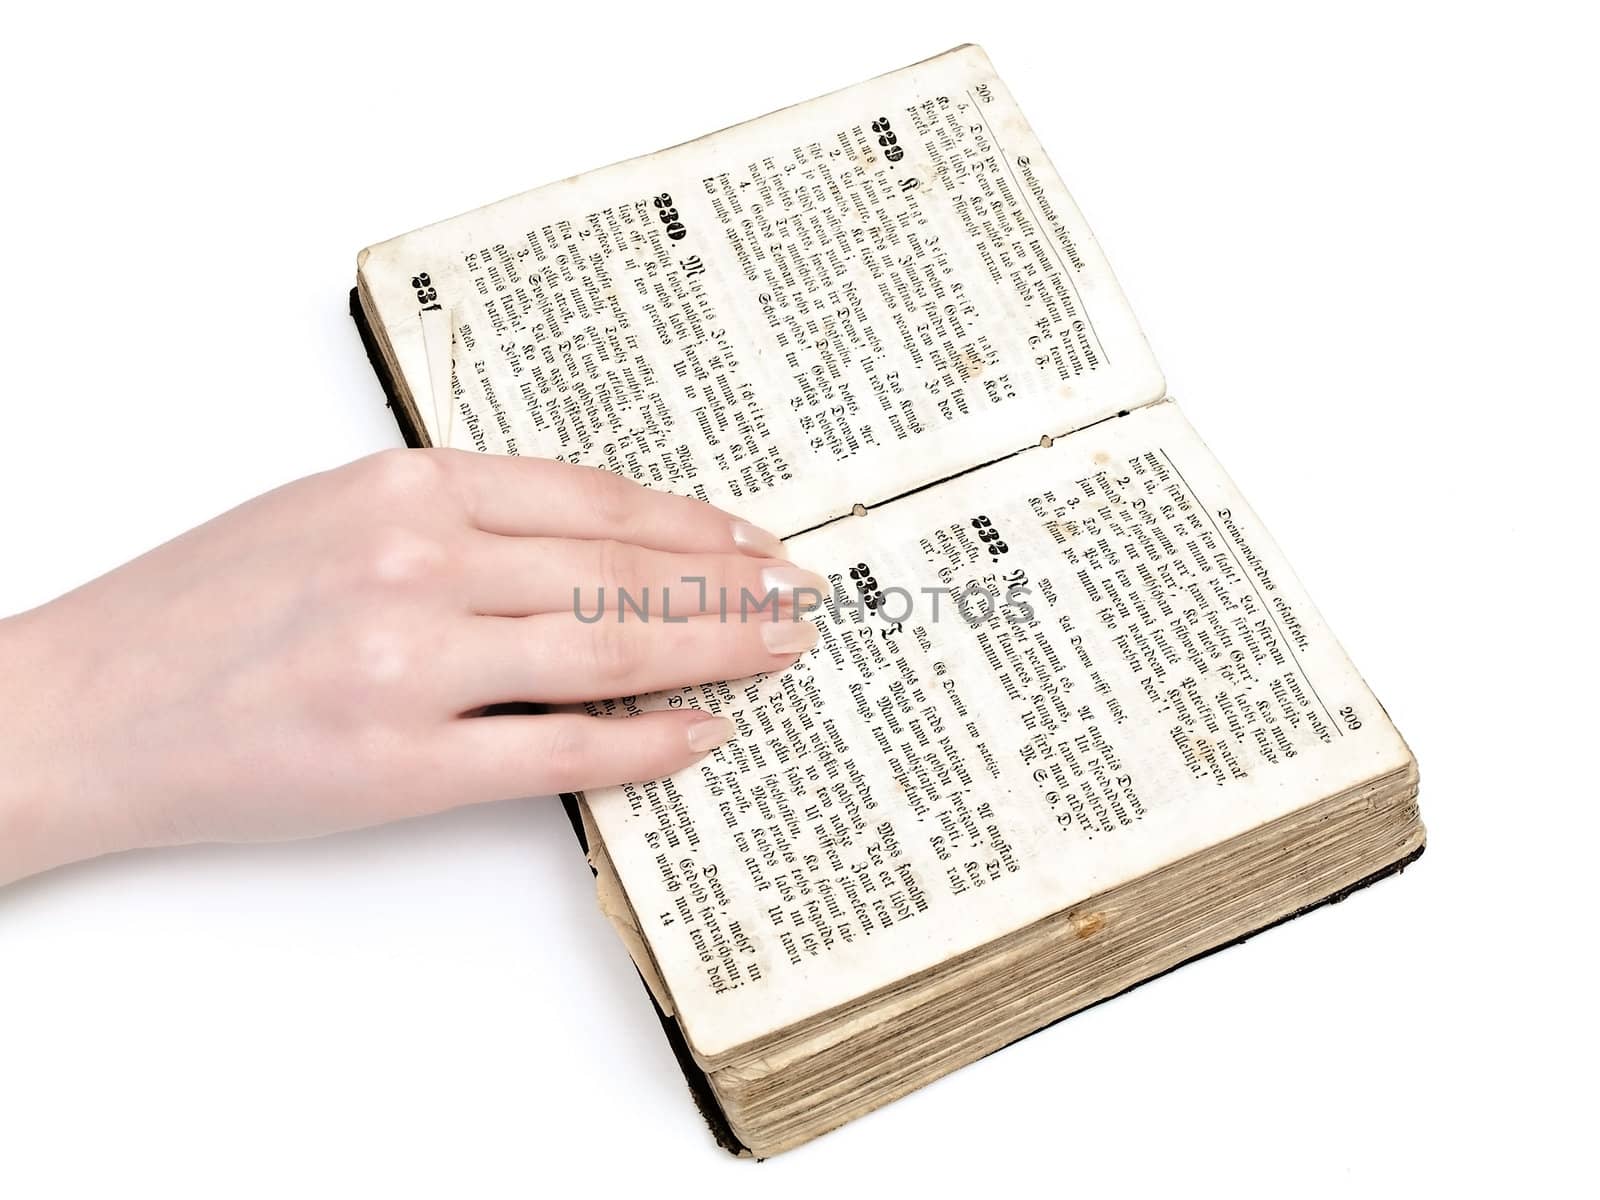 woman hand on old book against the white background